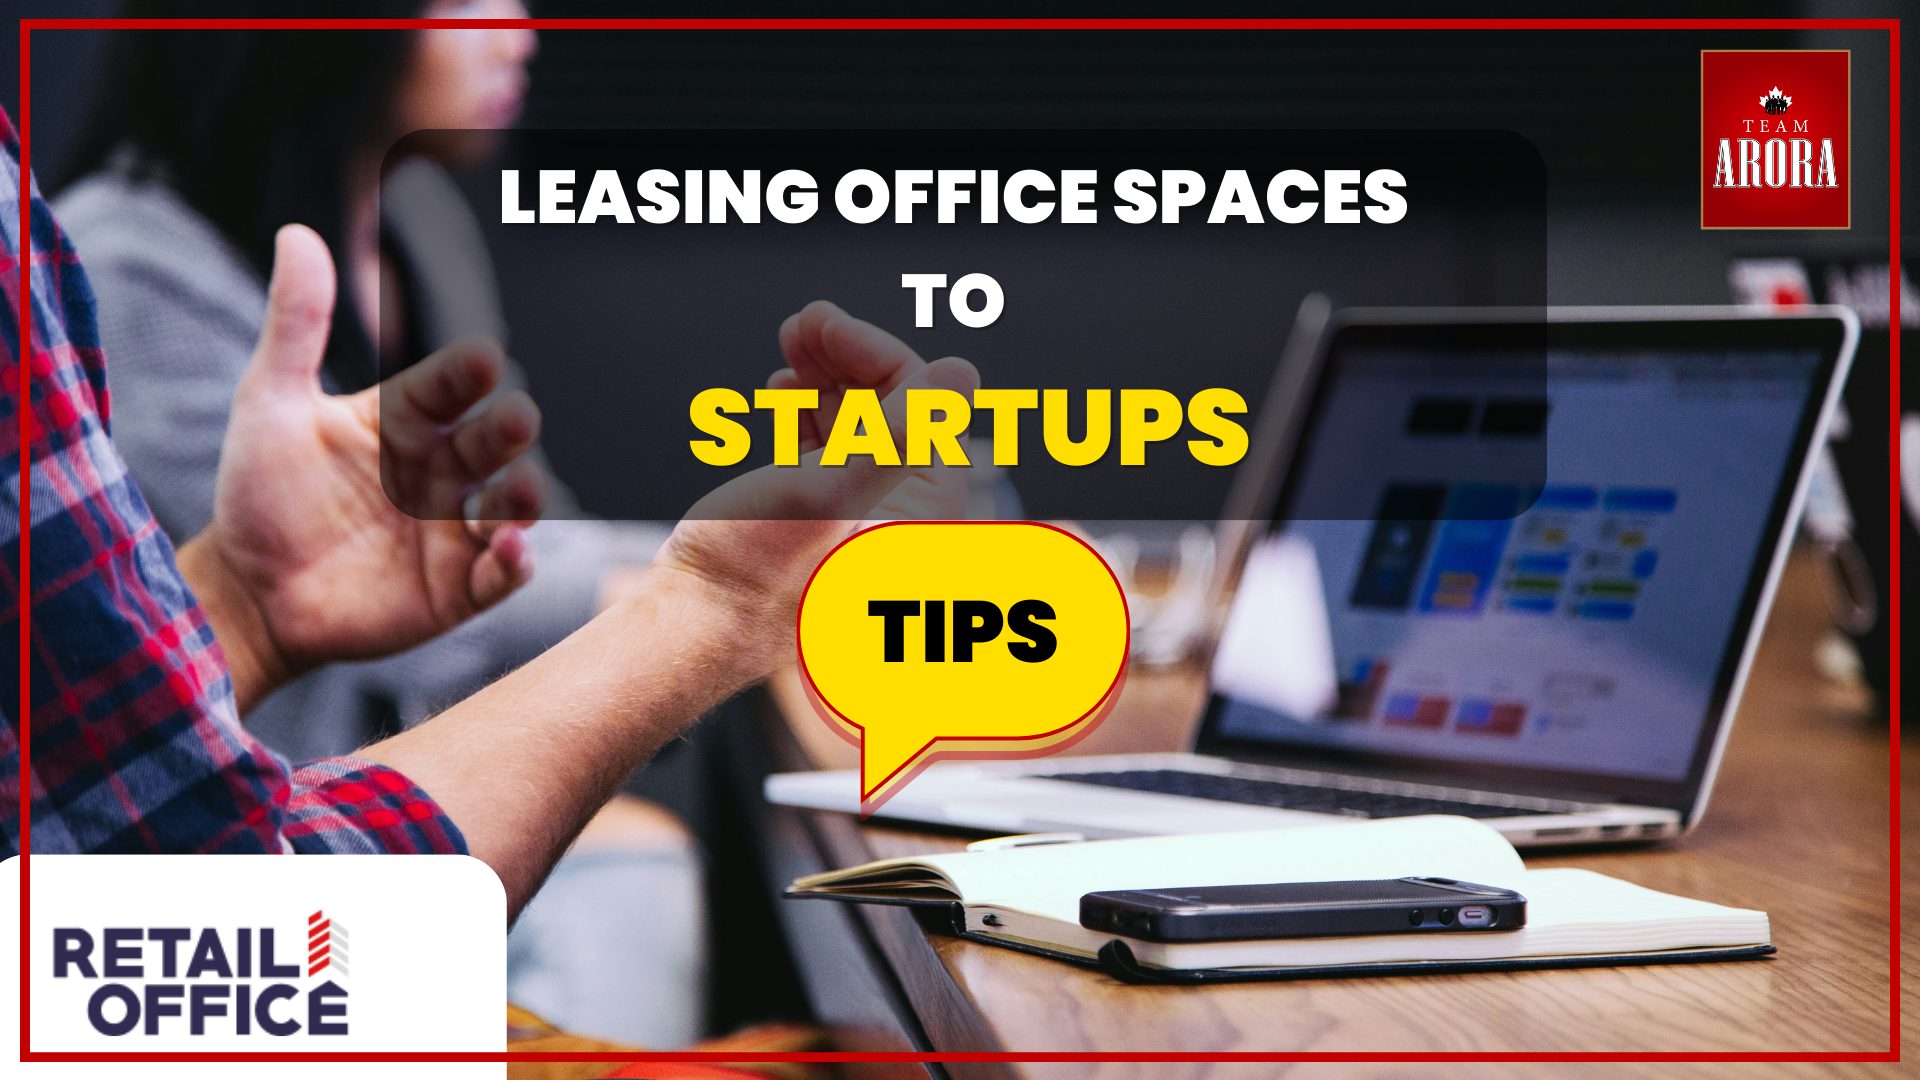 Essential Tips for Leasing Office Spaces to Startups